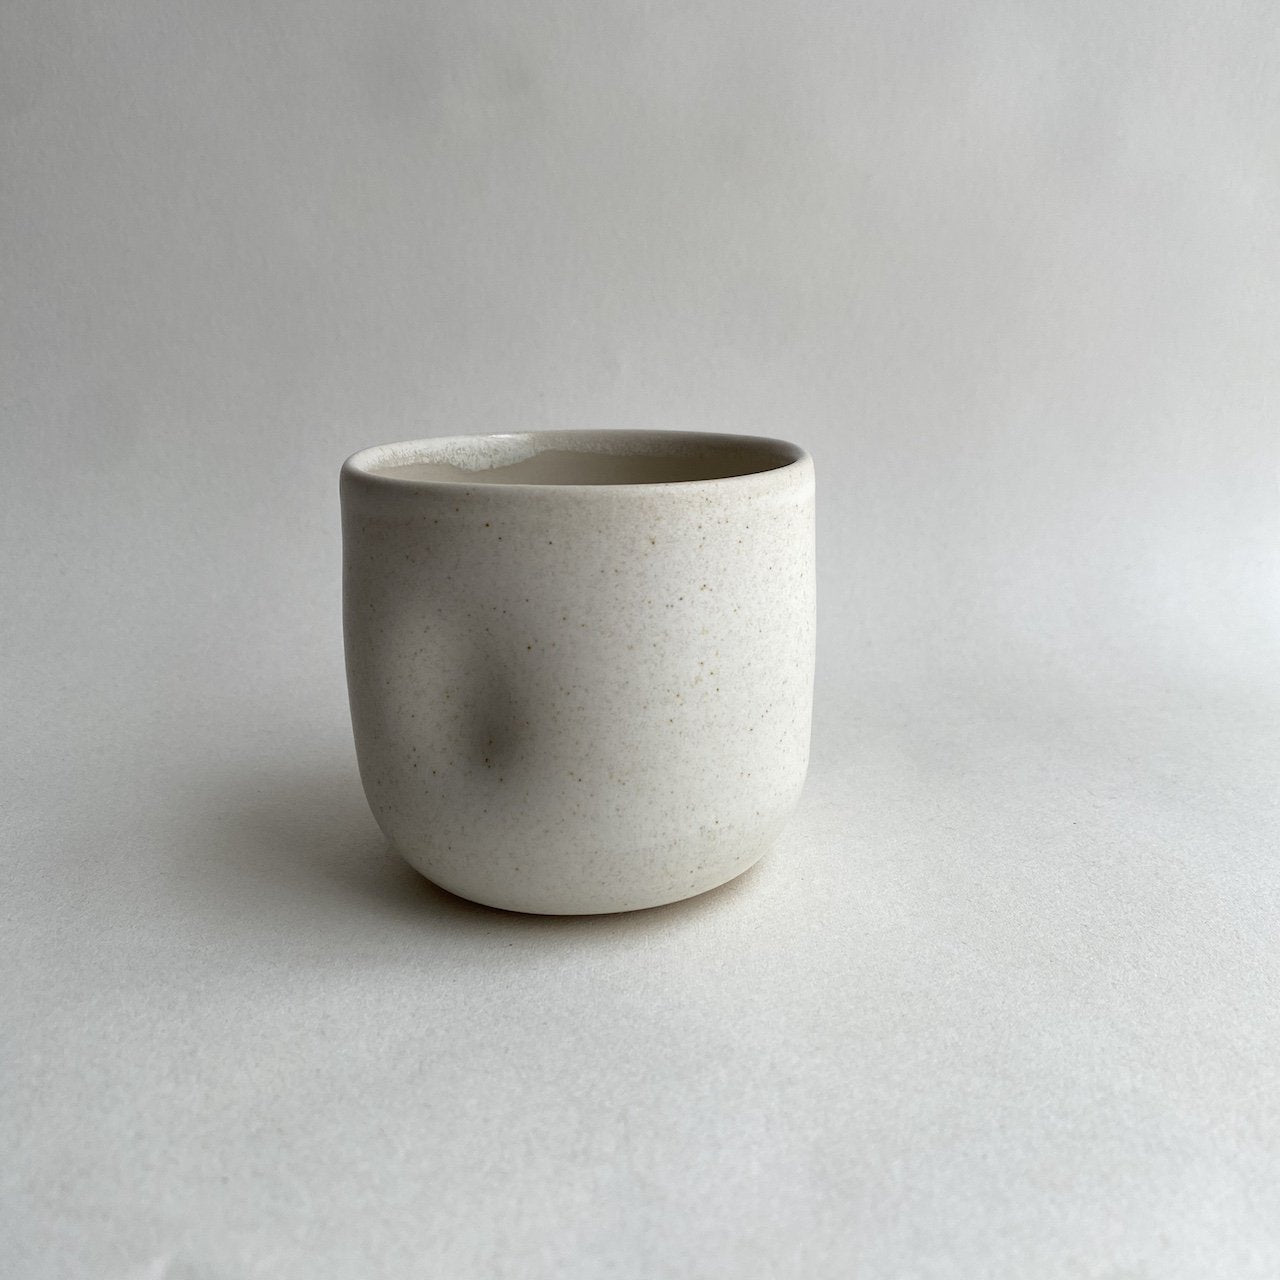 Small Dimple Cup | Oat Glaze | Handmade Ceramic | by Bowbeer Designs - Lifestory